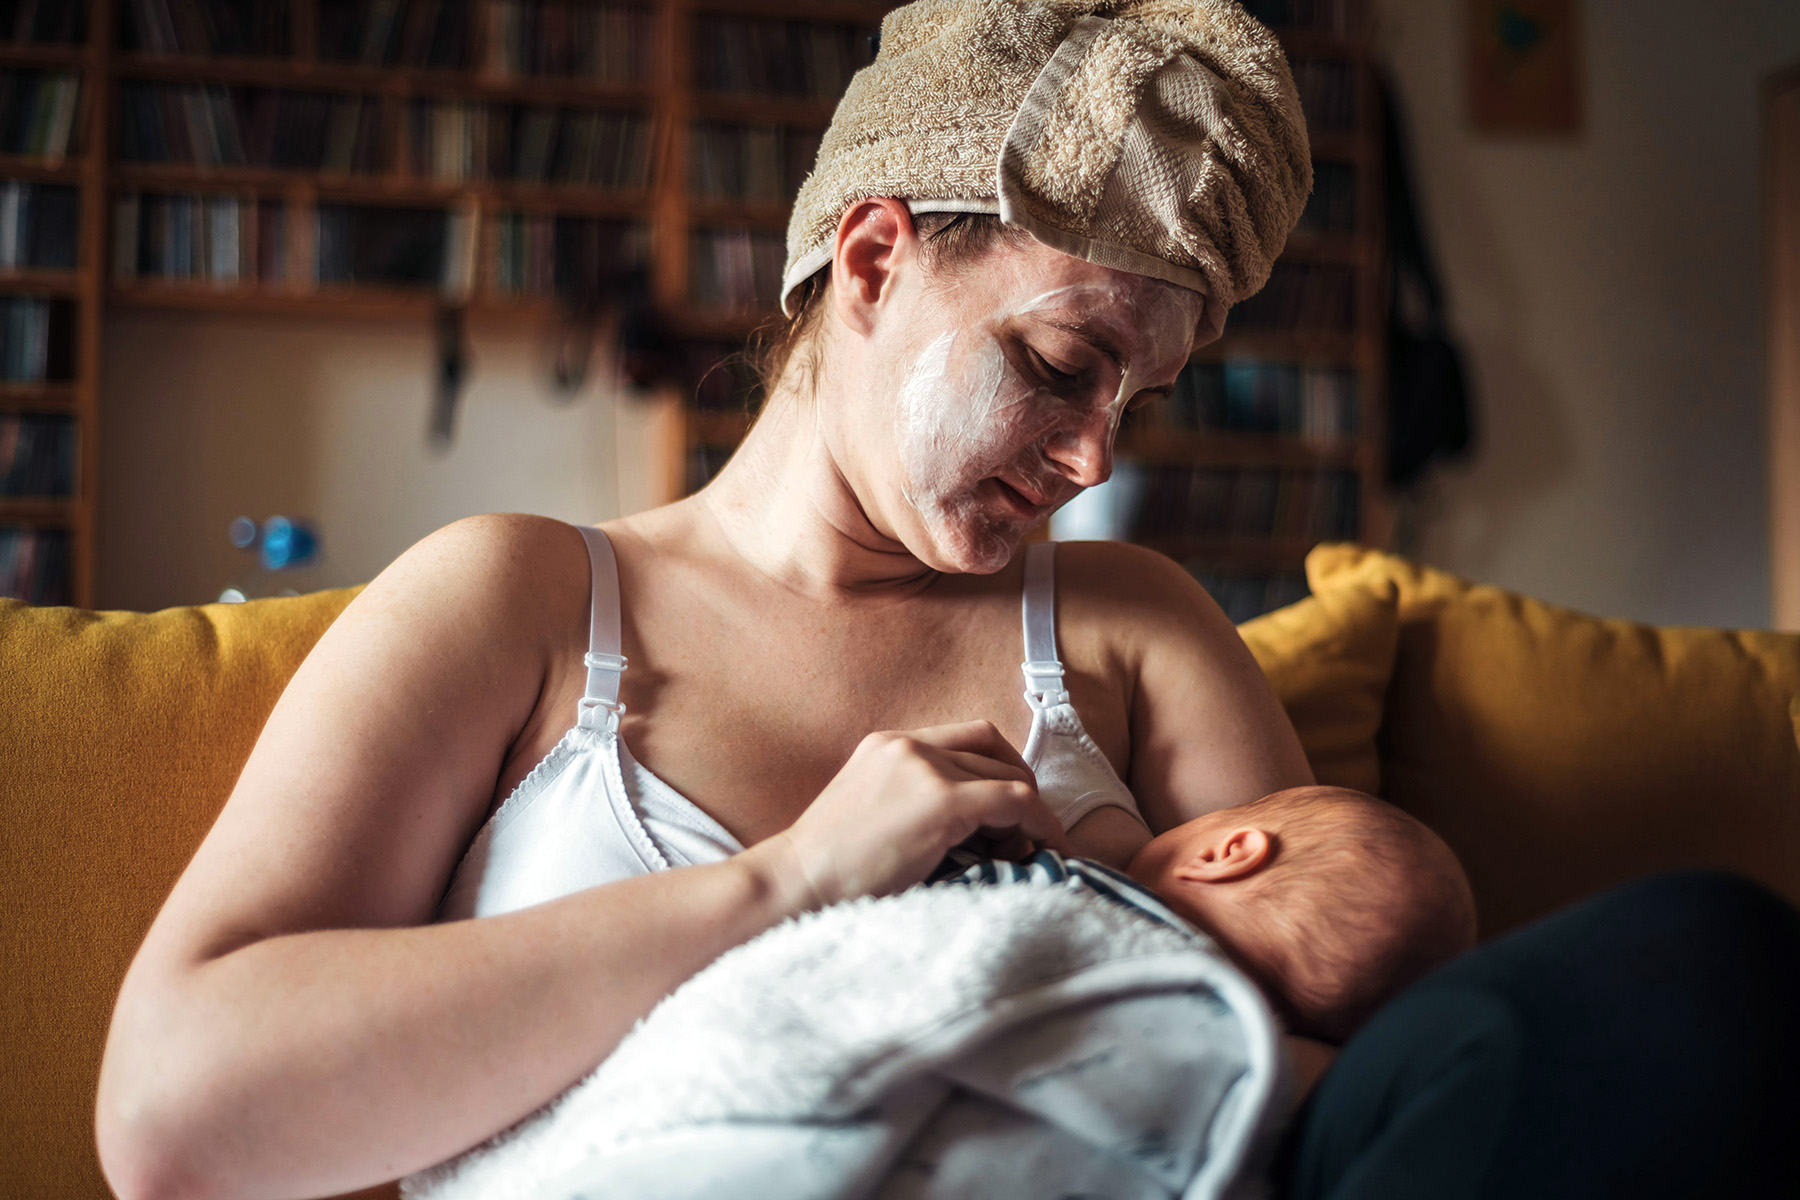 Woman sitting on a yellow couch at home, she's wearing a moisturizing face mask and has her hair wrapped in a towel. She's looking down at the newborn baby in her arms, who is breastfeeding.